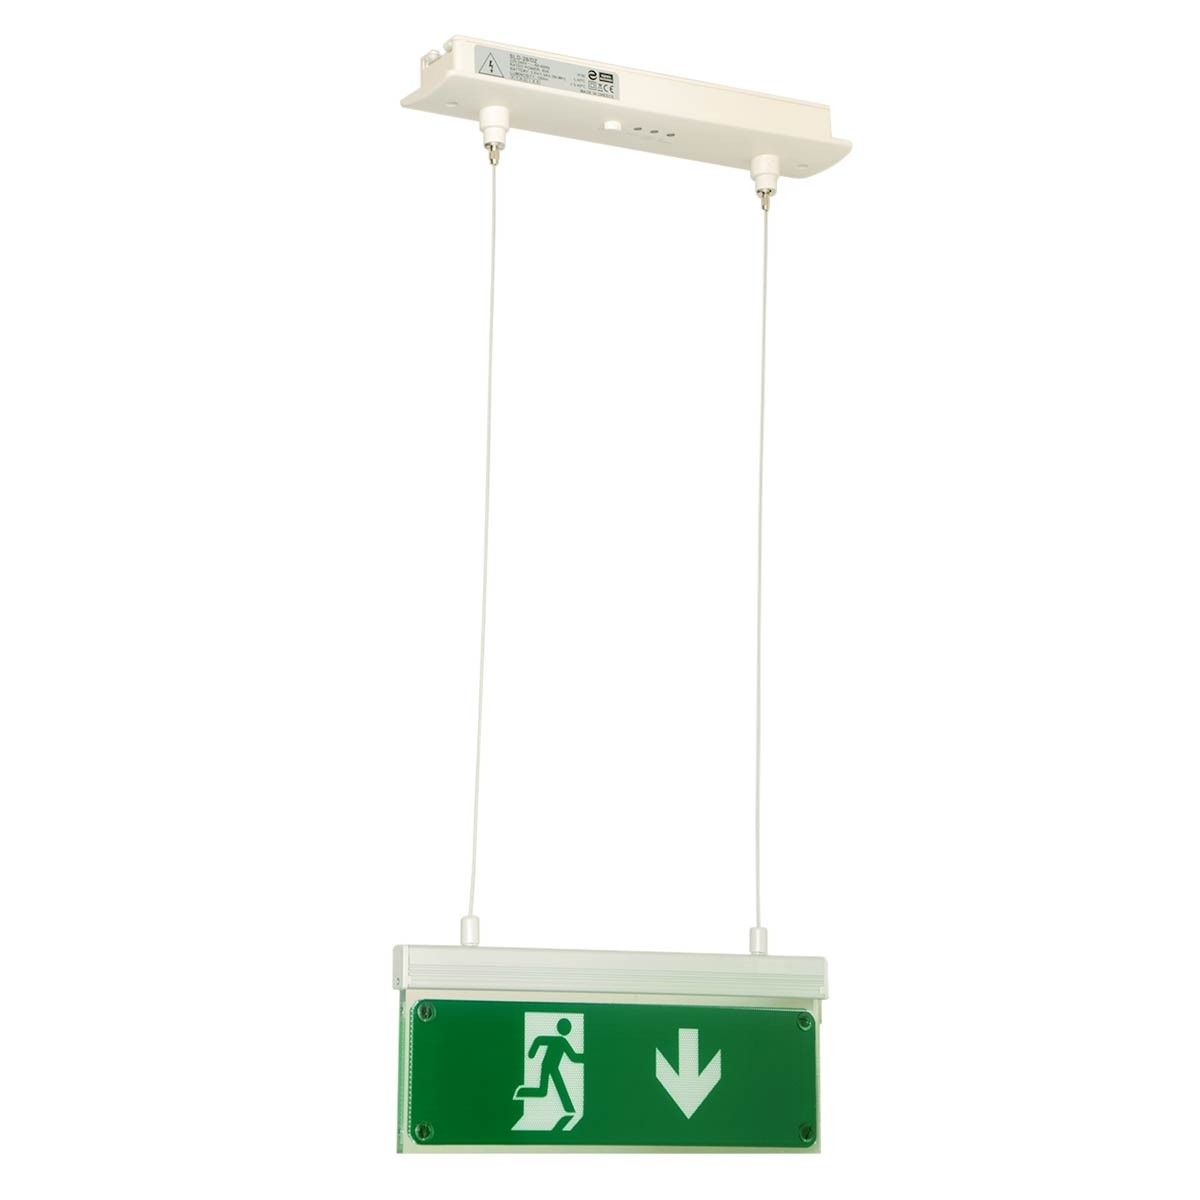 Olympia Emergency Luminar Eco Light Maintained Exit Sign Arrow Down SLD-28/DZ- Green